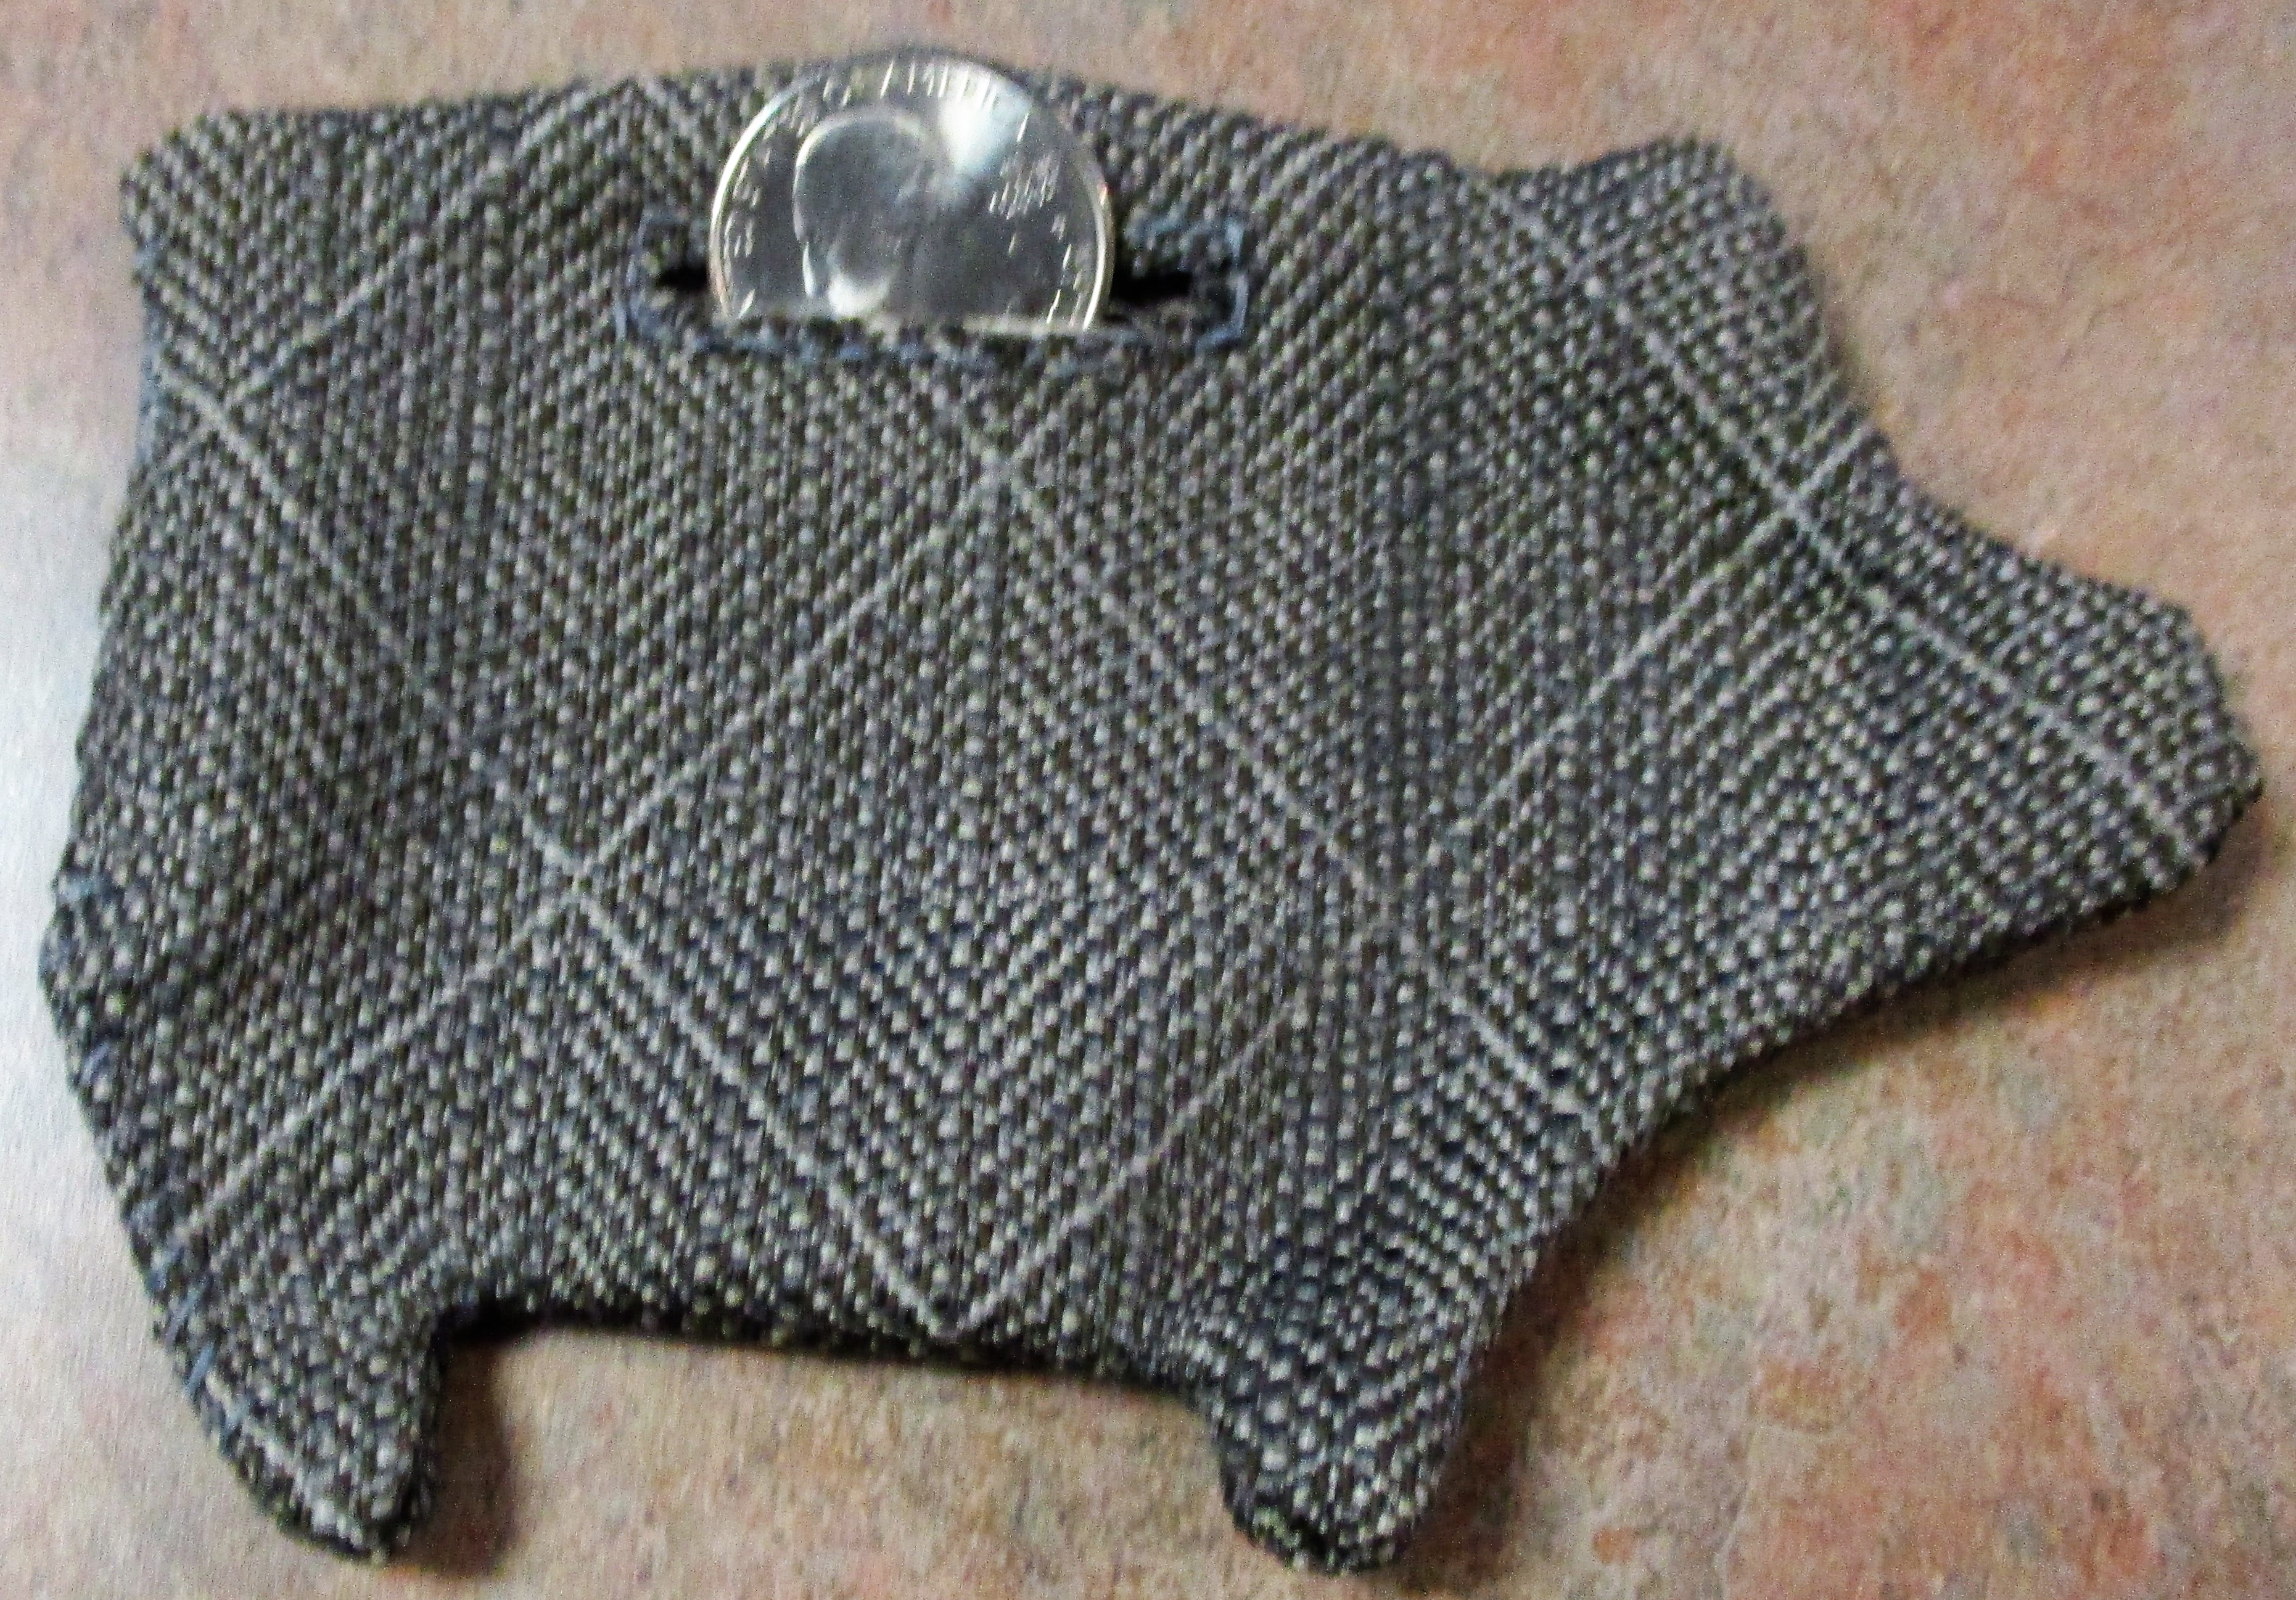 Fabric coin purse in the shape of a pig.